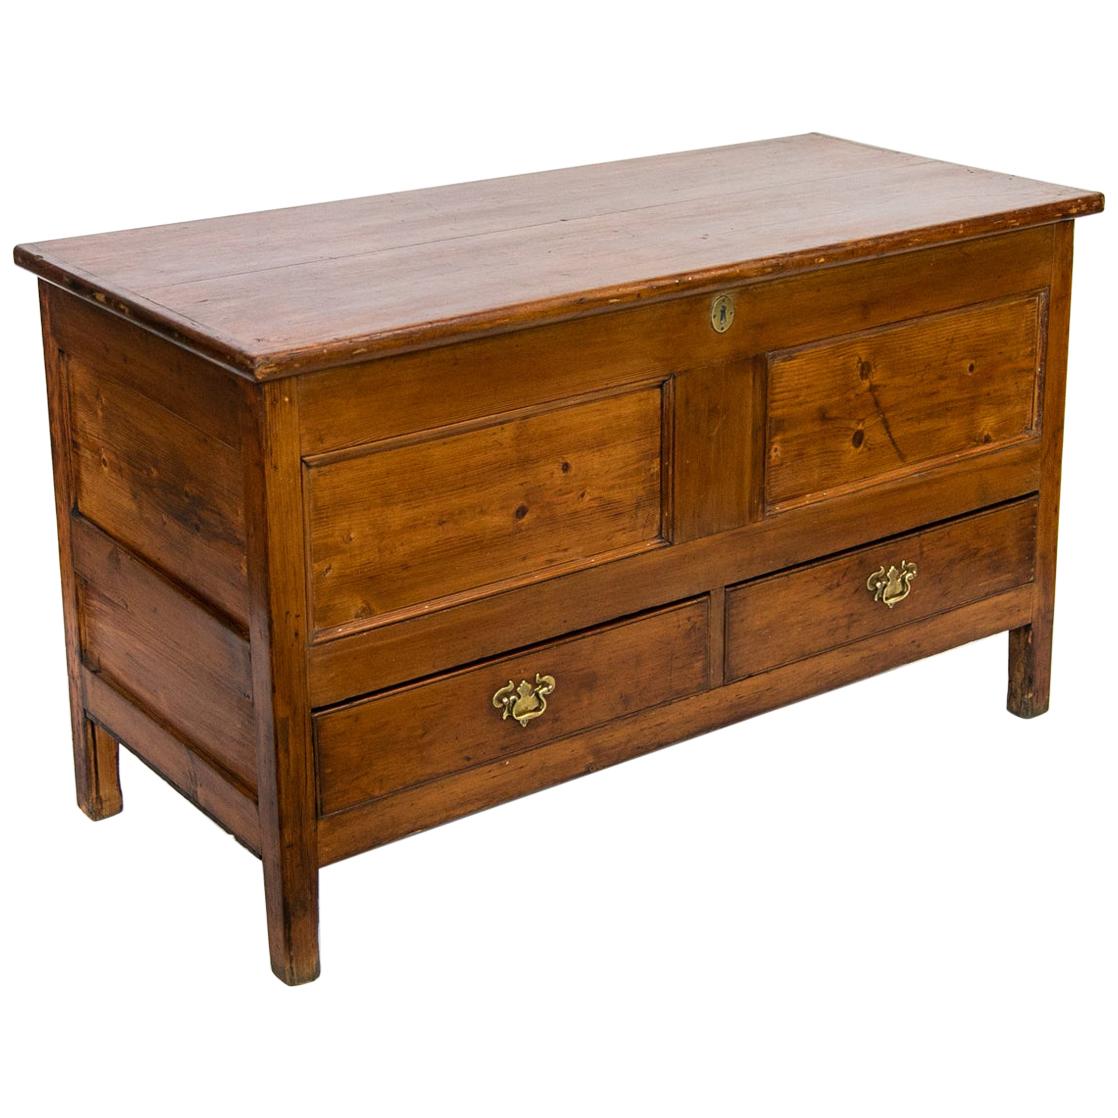 English Pine Two-Drawer Blanket Chest